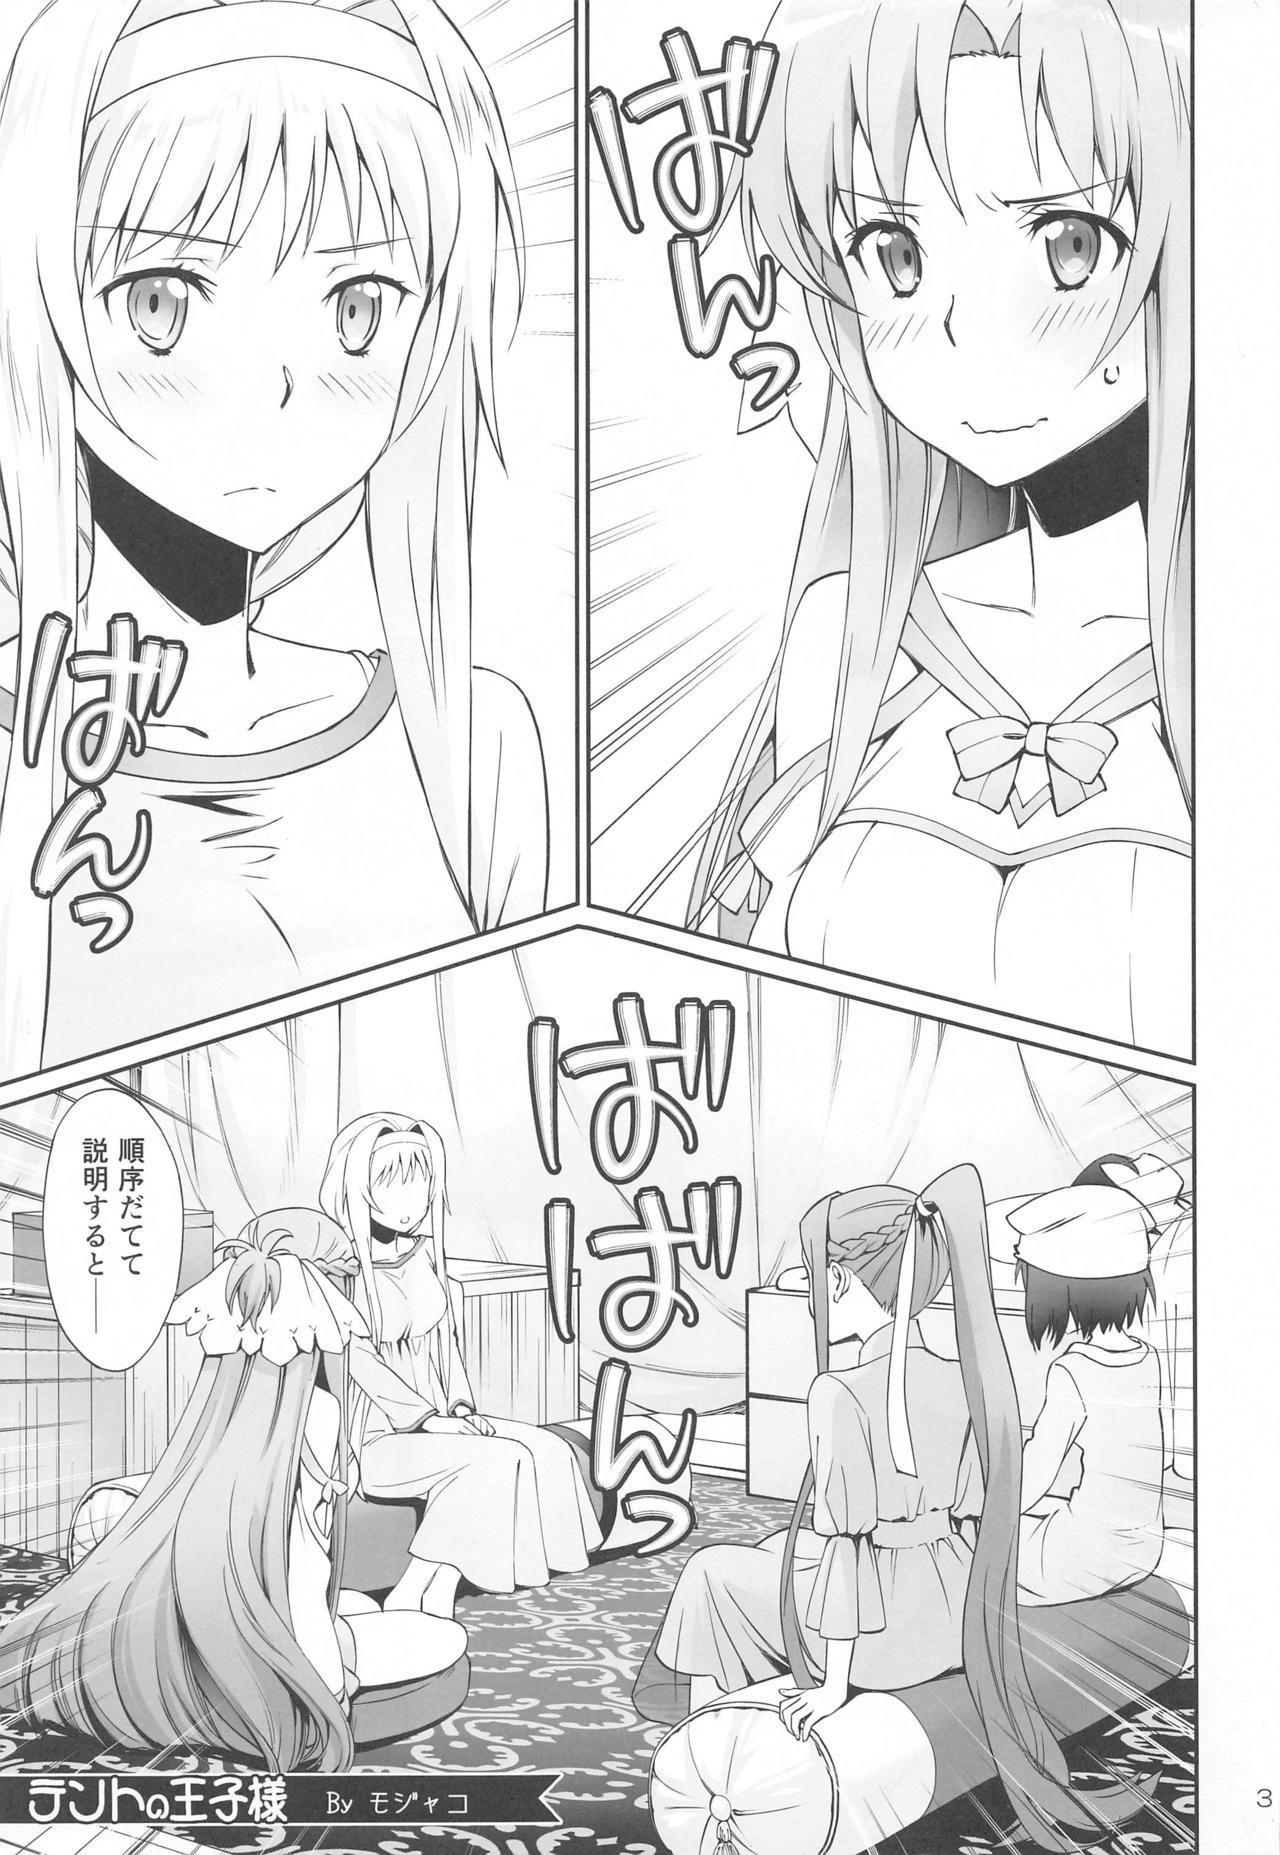 Missionary Tent no Ouji-sama - Sword art online Gay Sex - Page 2